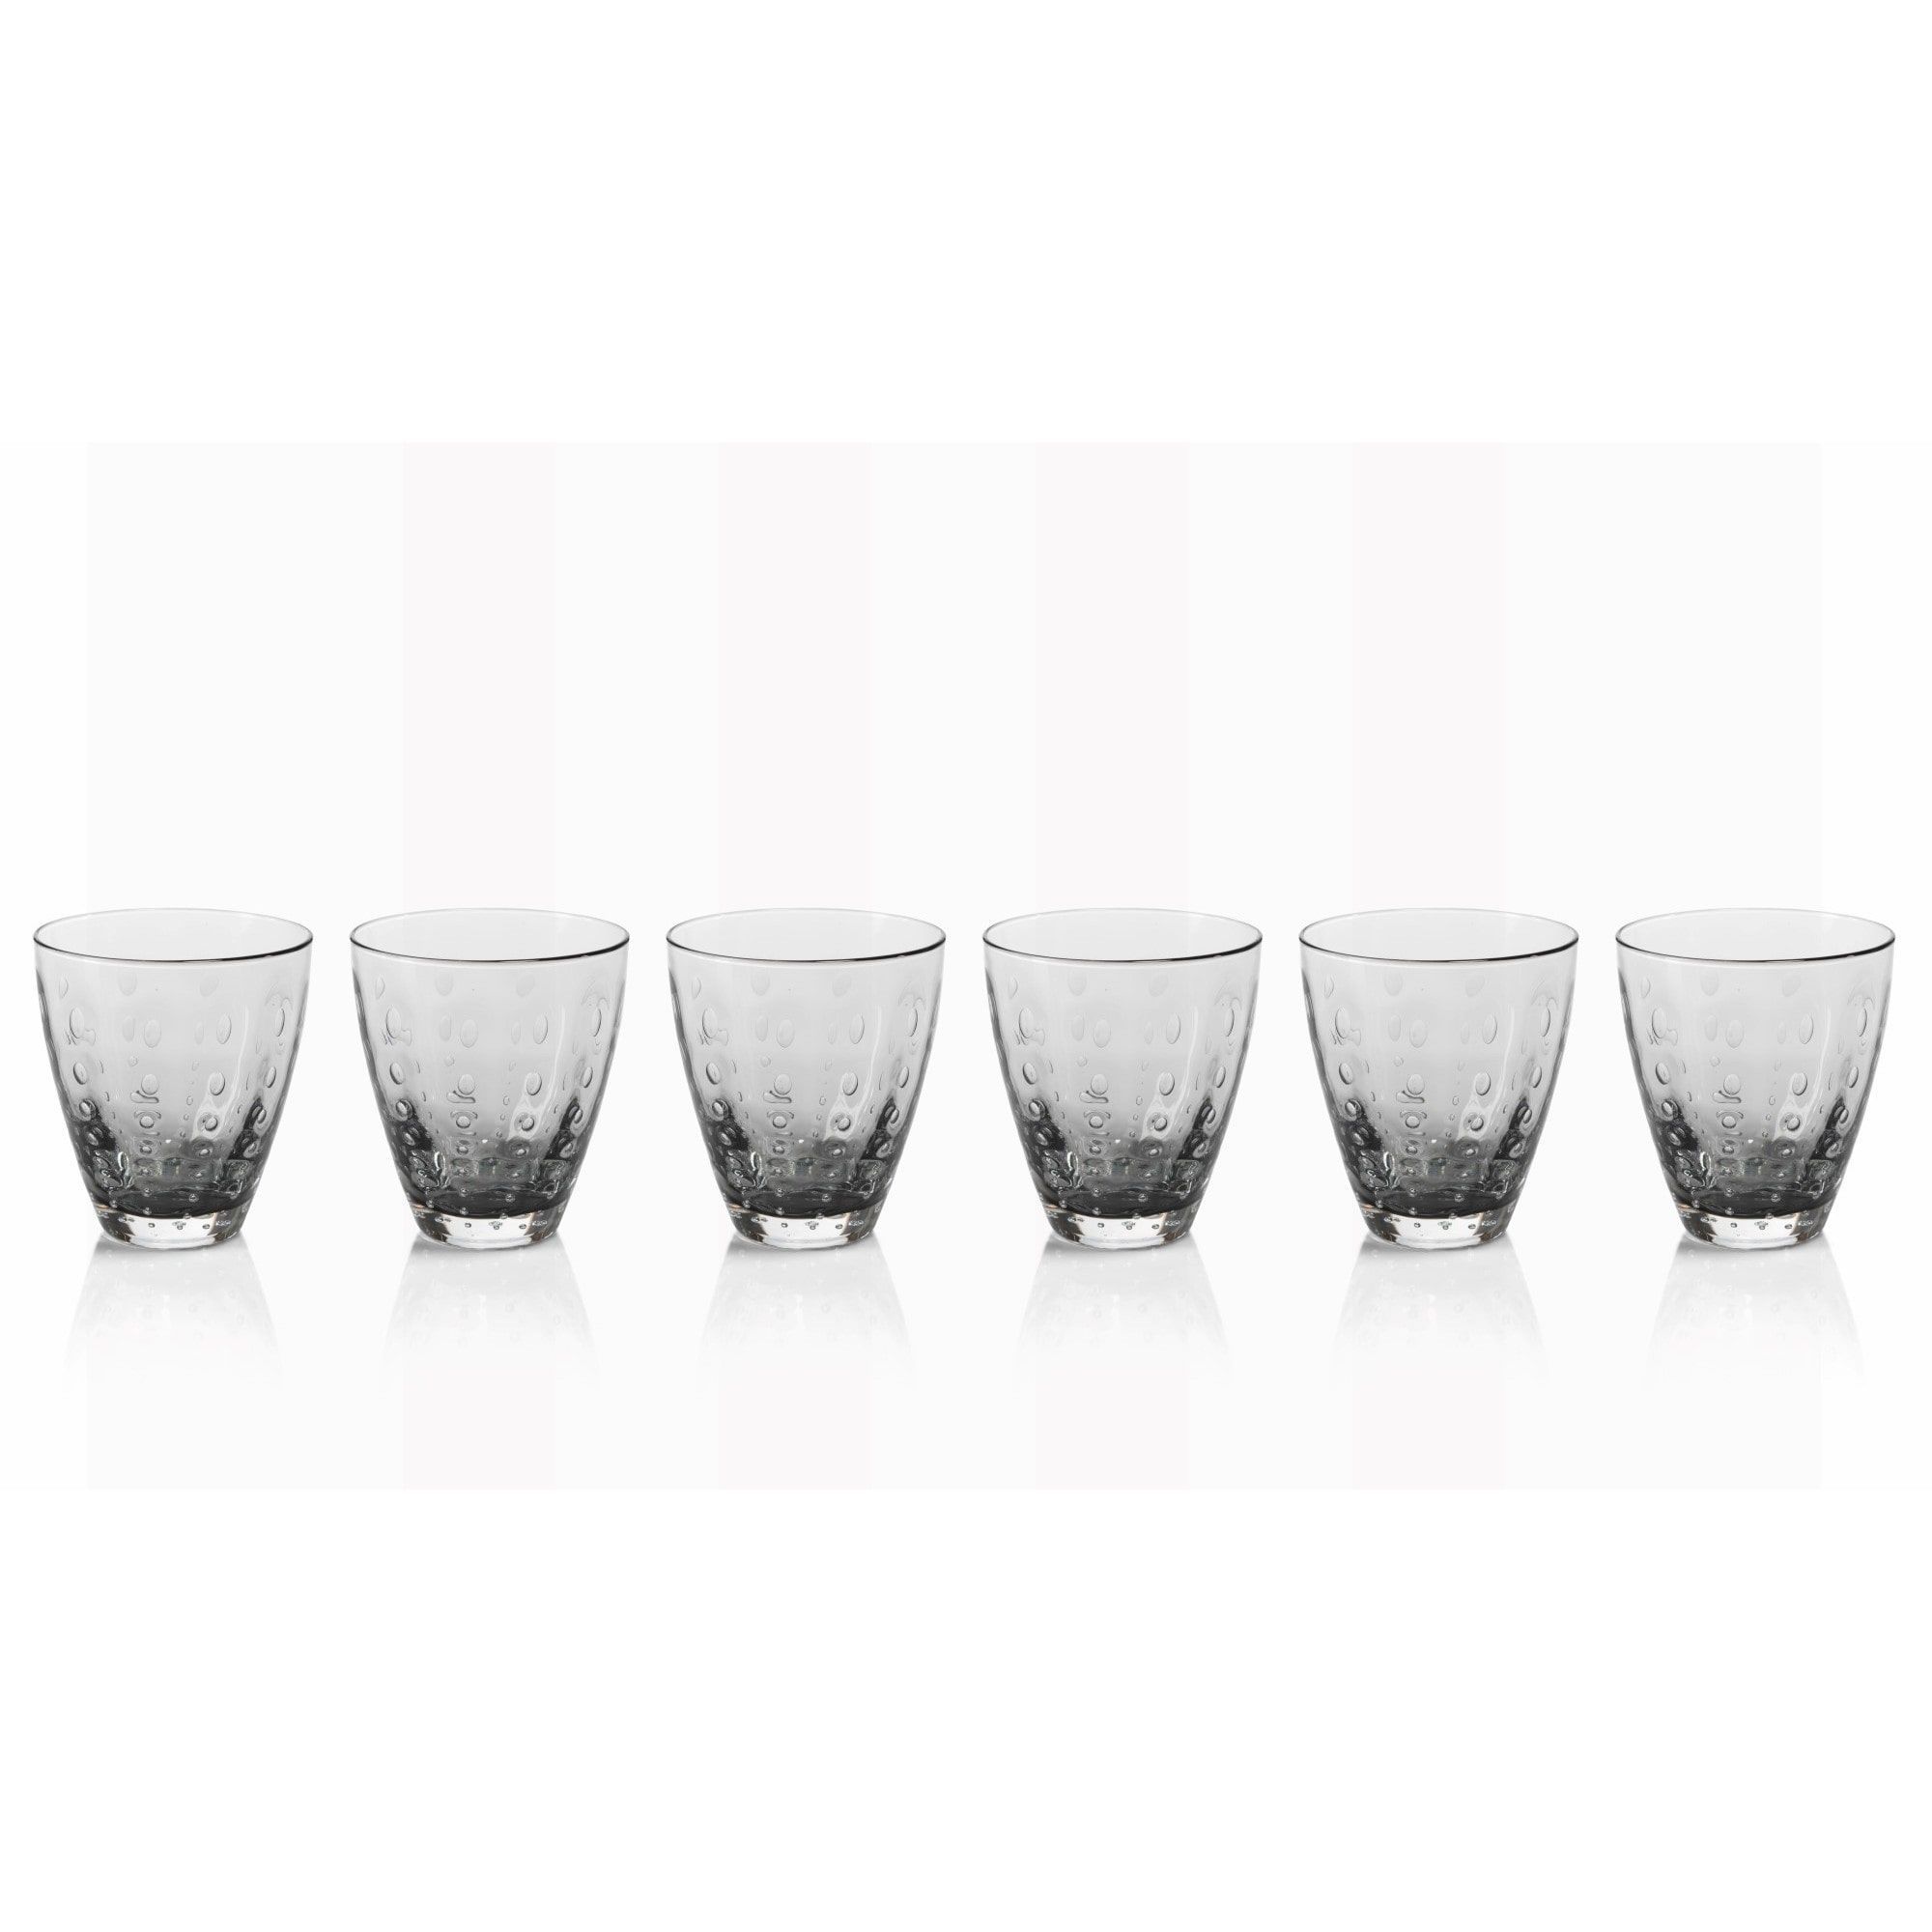 Zodax Rock Glass, Bubbled Design, Gray (Set of 6) (6-Piece Bubbled ...